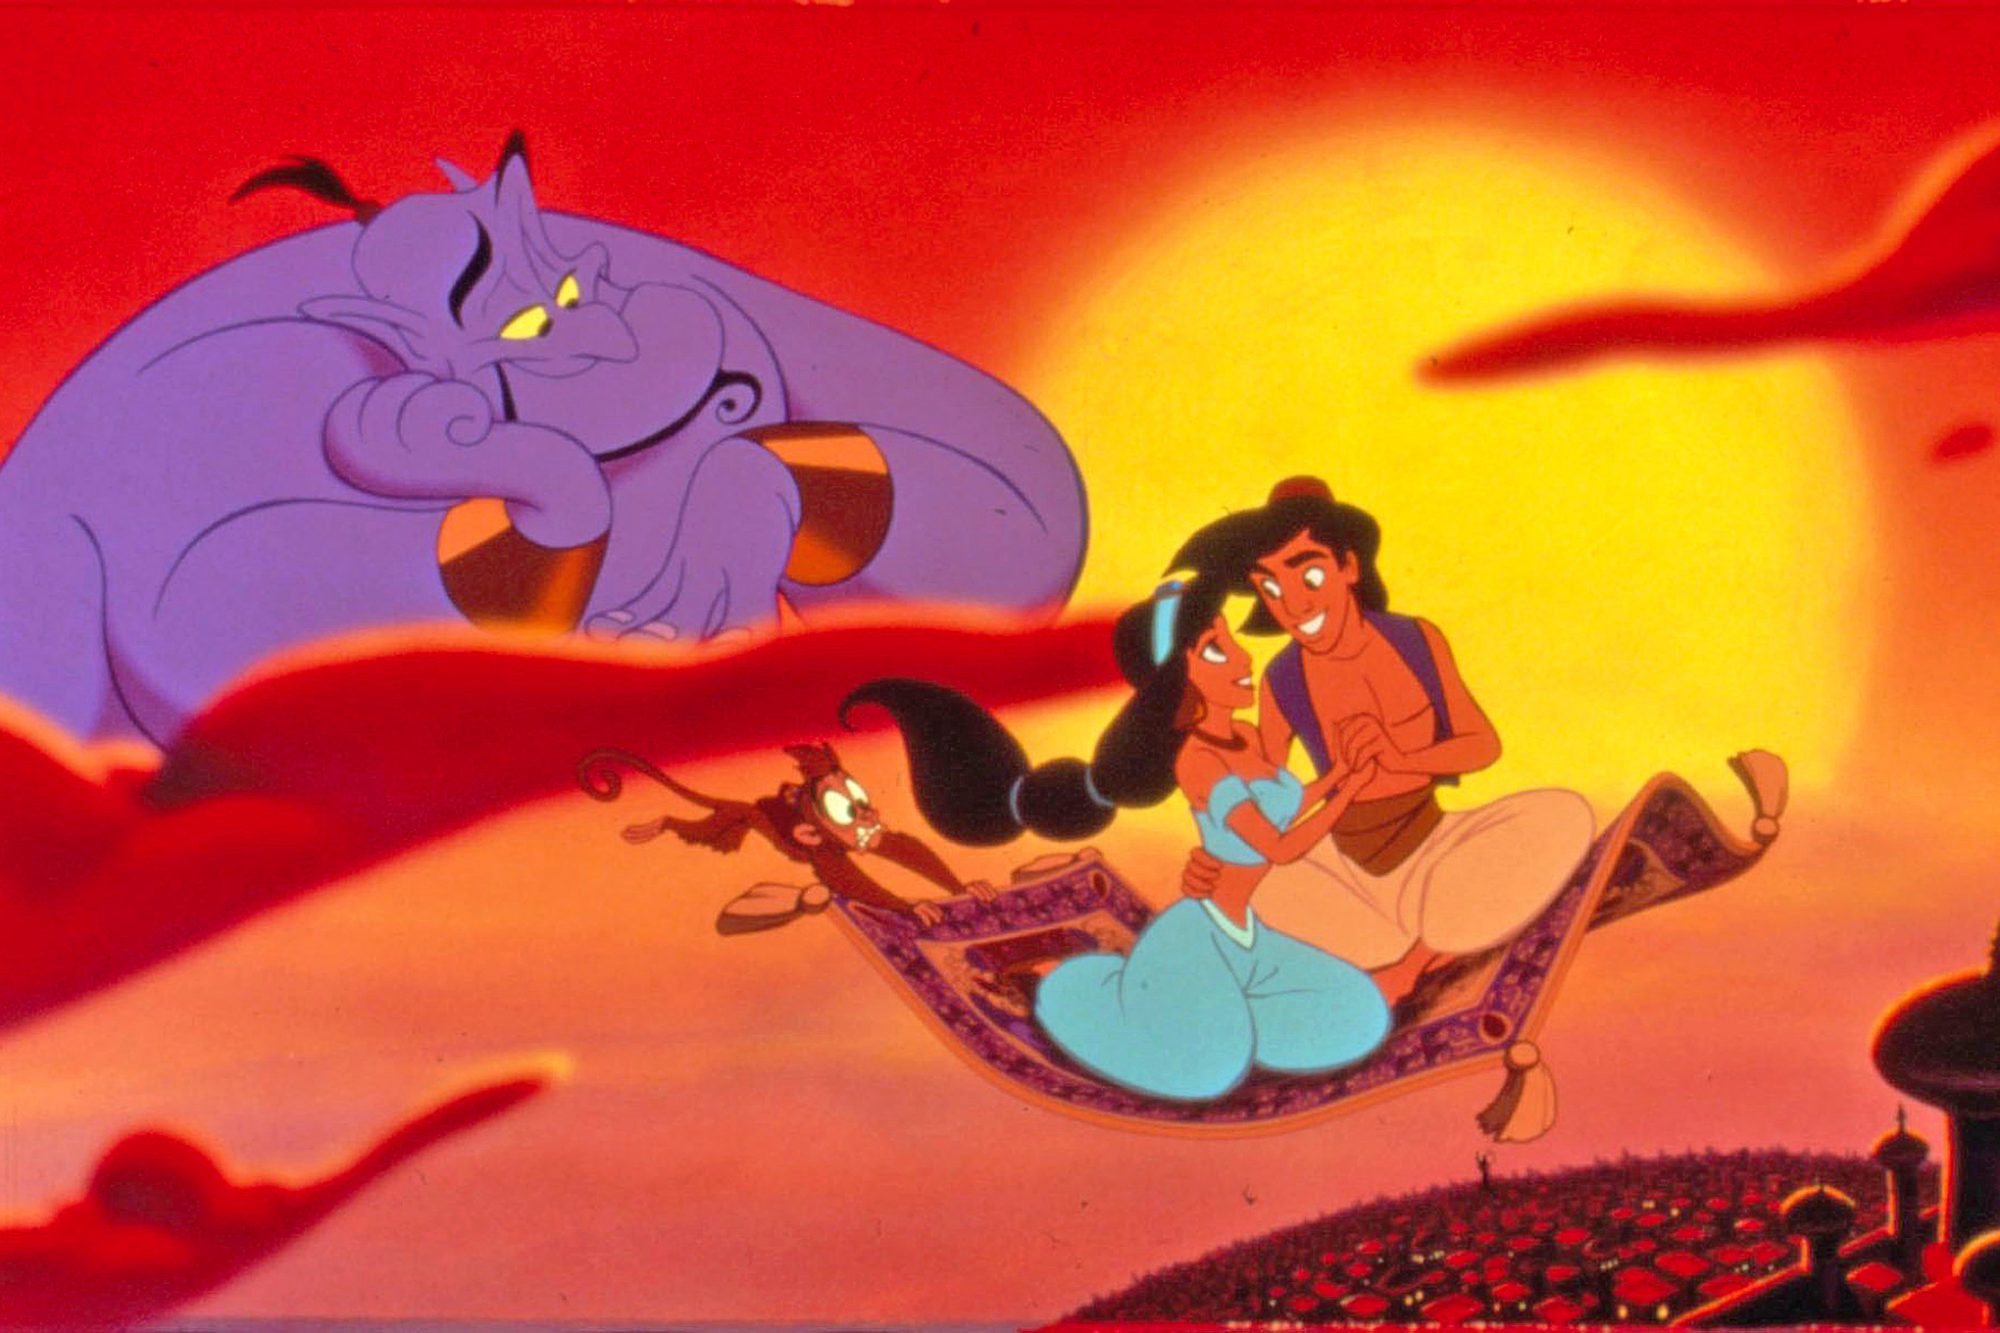 Aladdin and Jasmine take a ride on the magic carpet. The genie admires them from a nearby cloud.